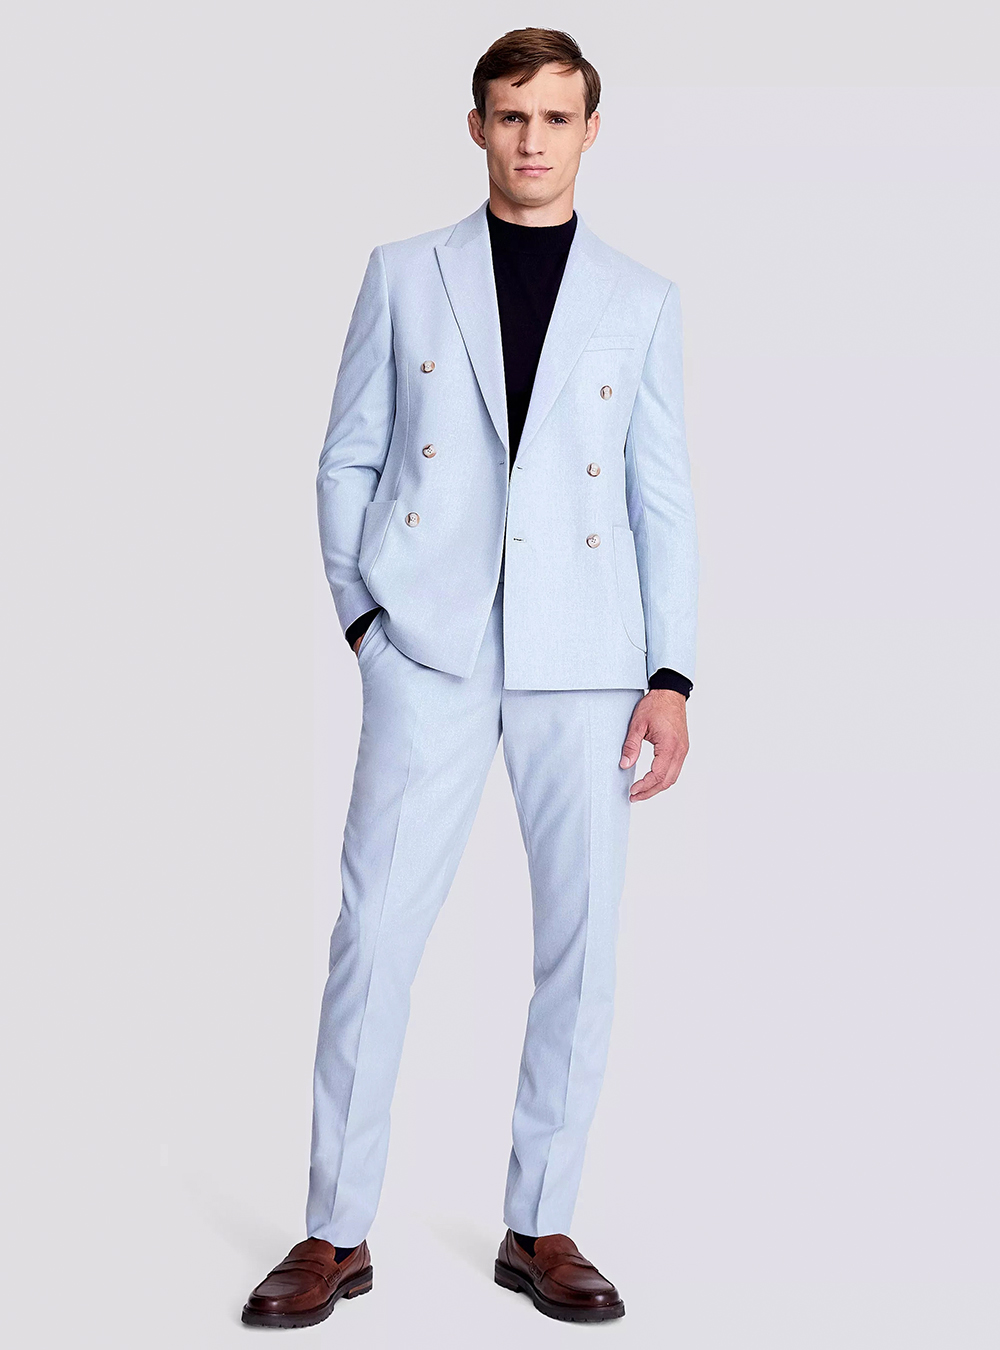 Light blue double-breasted suit, black crew-neck sweater and brown loafers